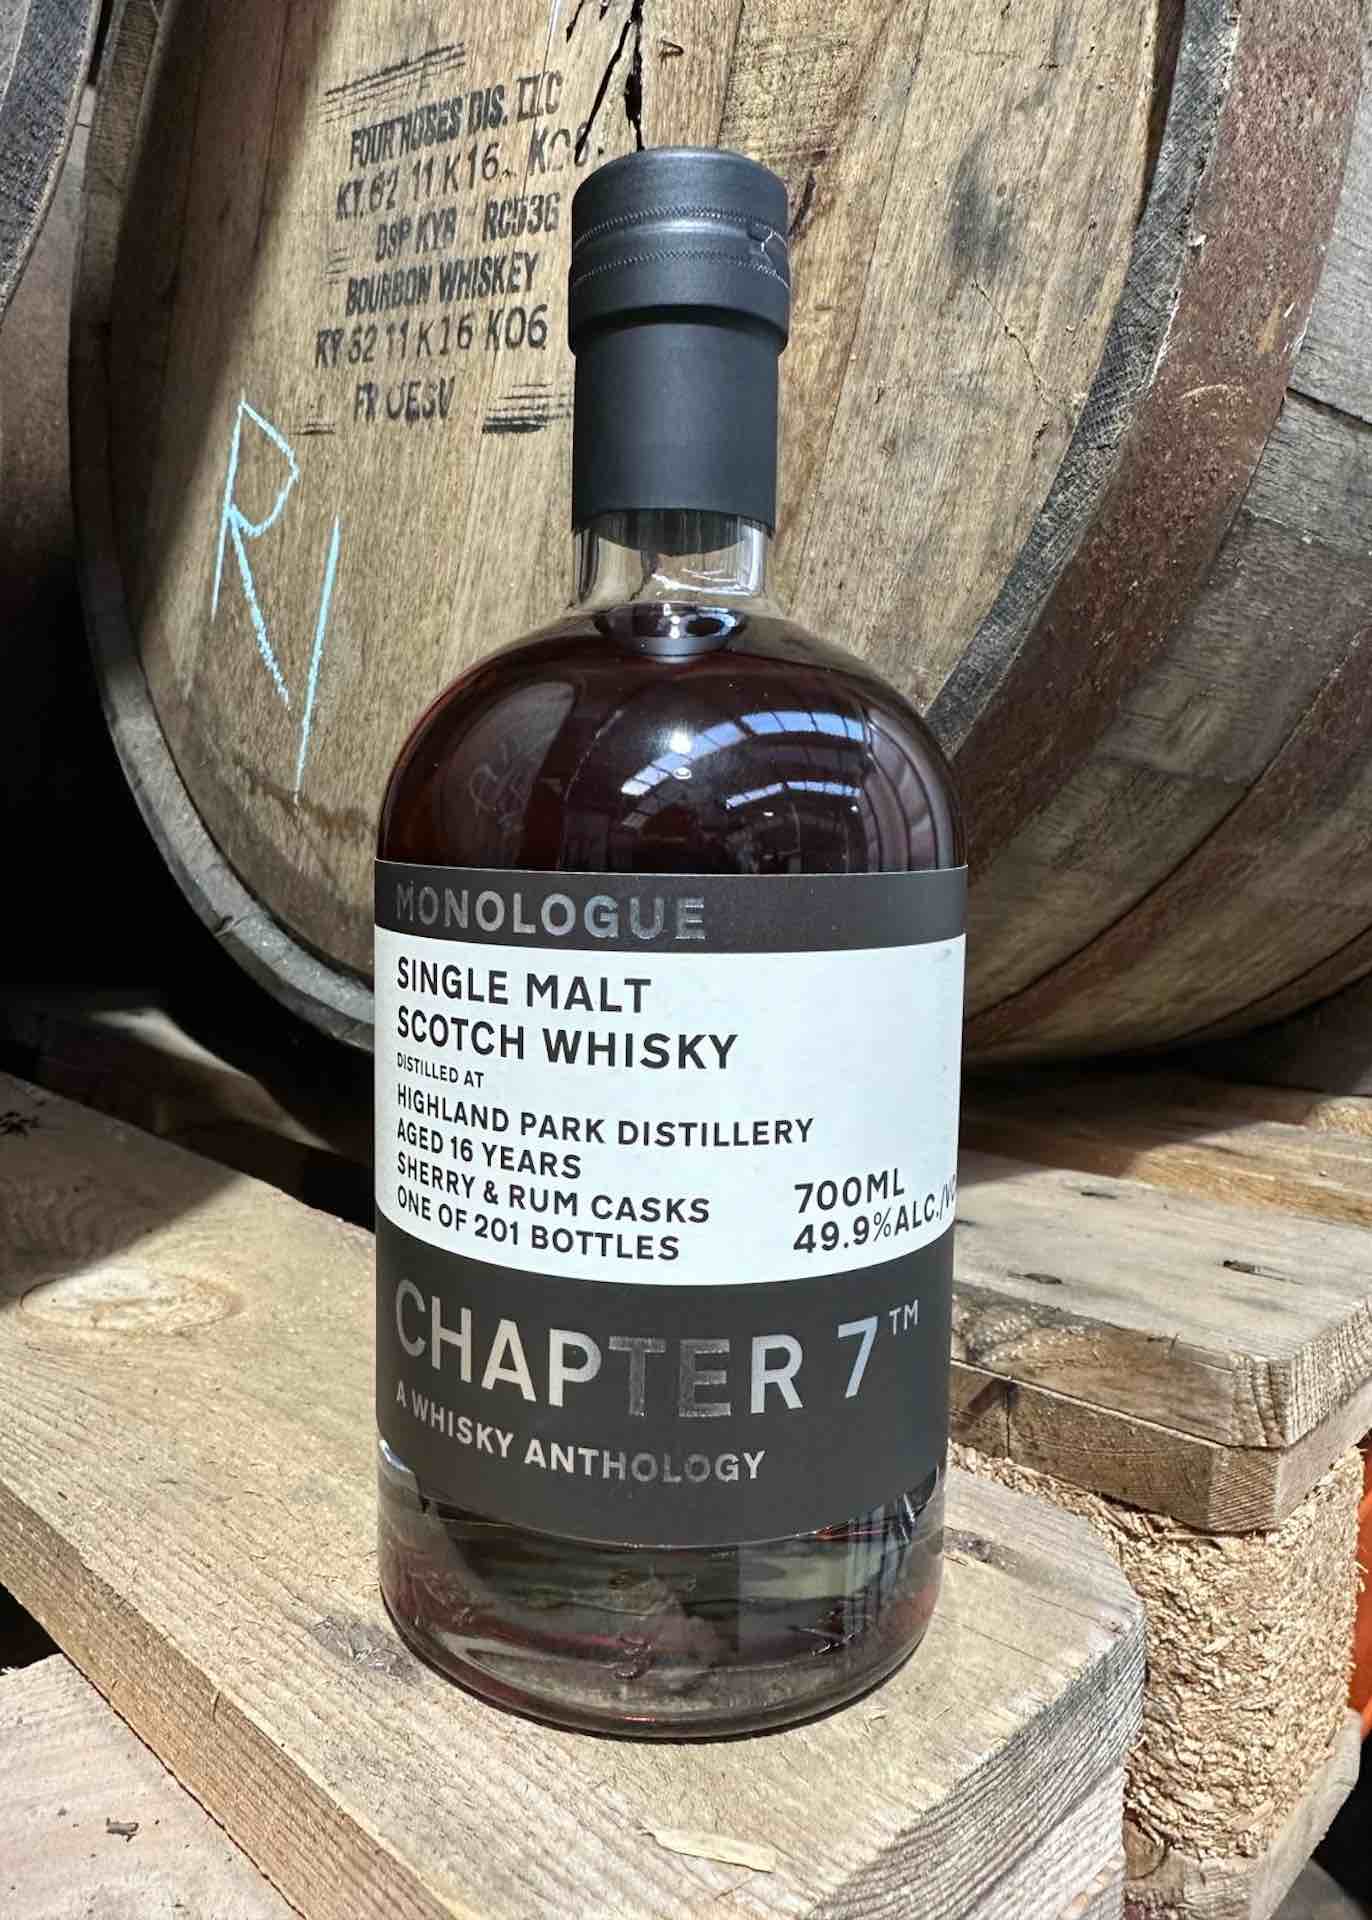 Chapter 7 Highland Park 16 Year Old Sherry Aged Rum Finish